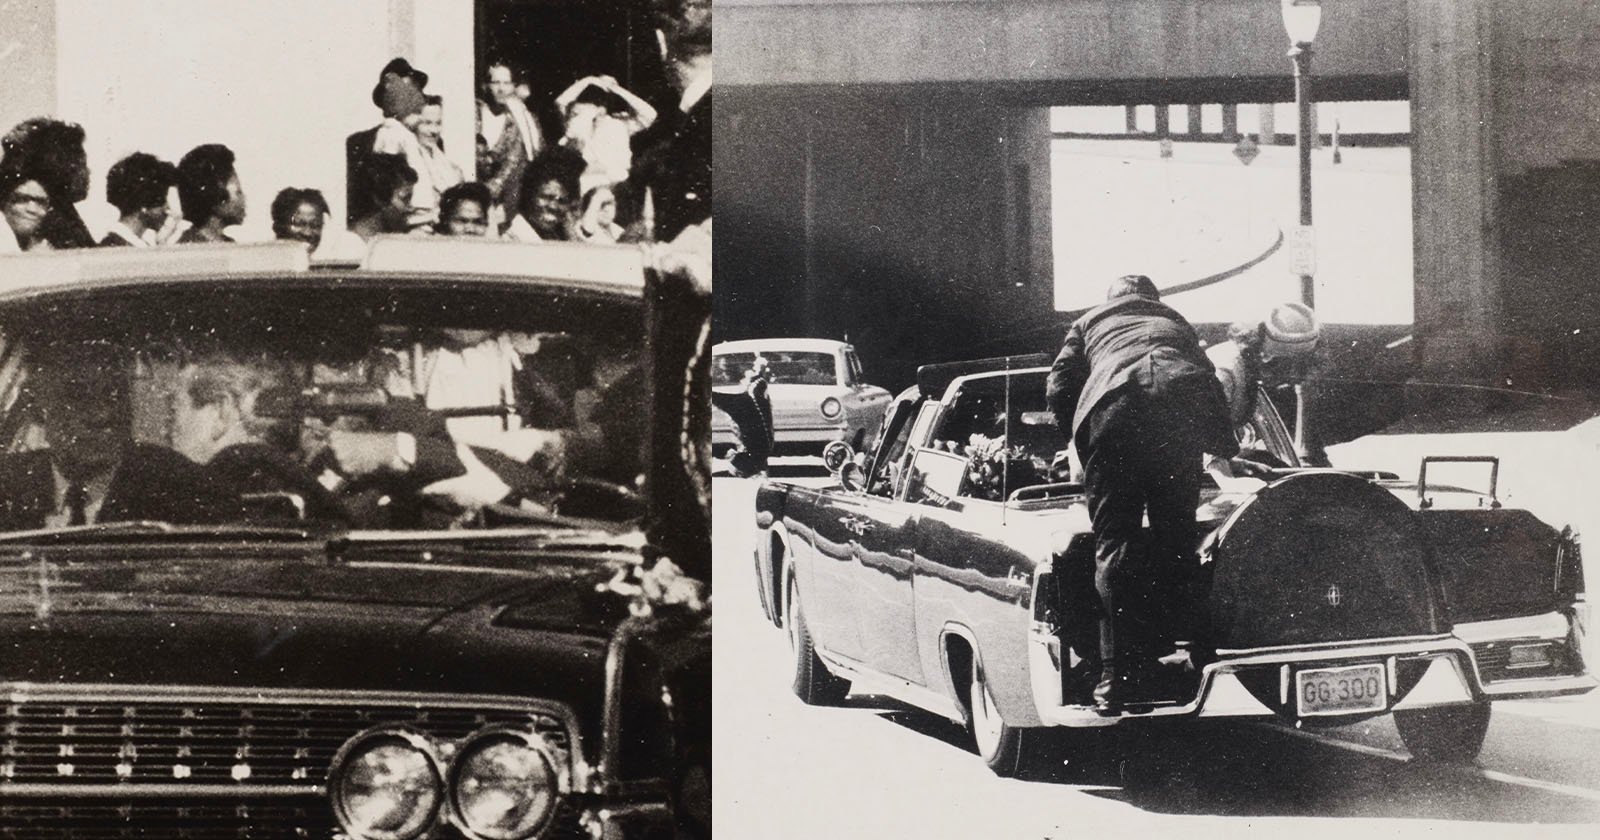 Rare and Valuable JFK Assassination Photos Found in Garage Go to Auction